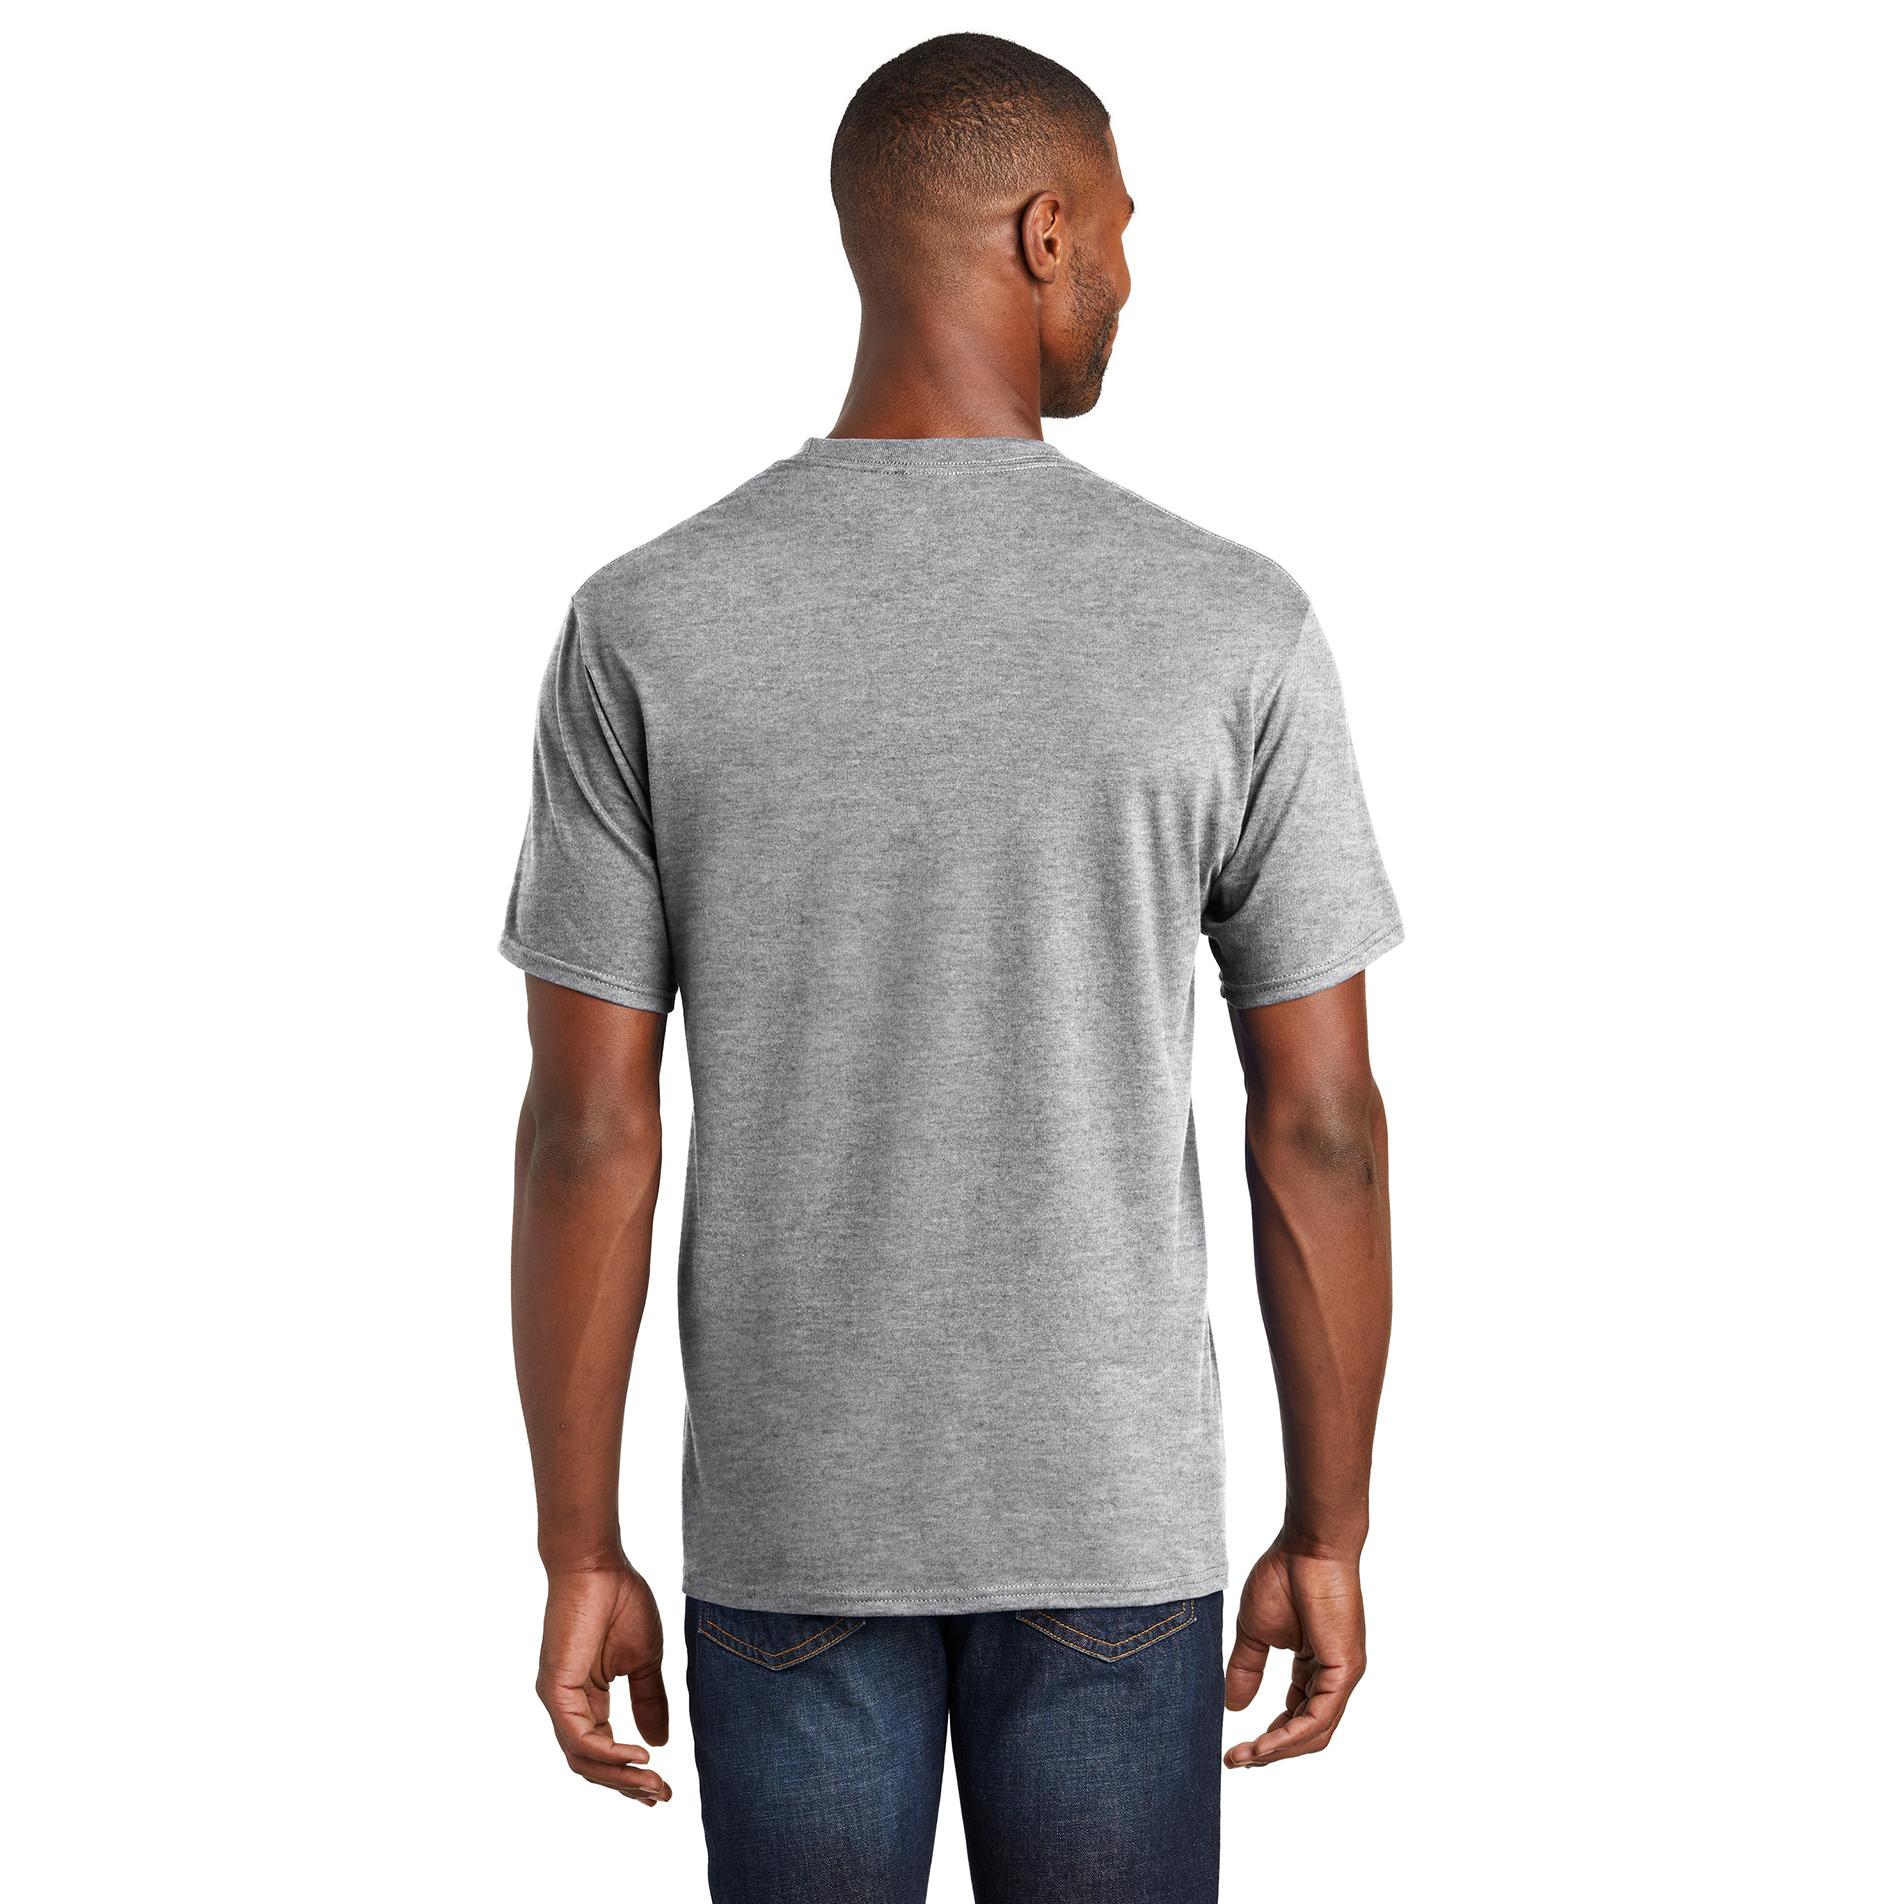 | Fan Tee Athletic PC450 Source Company Full Port - & Heather Favorite